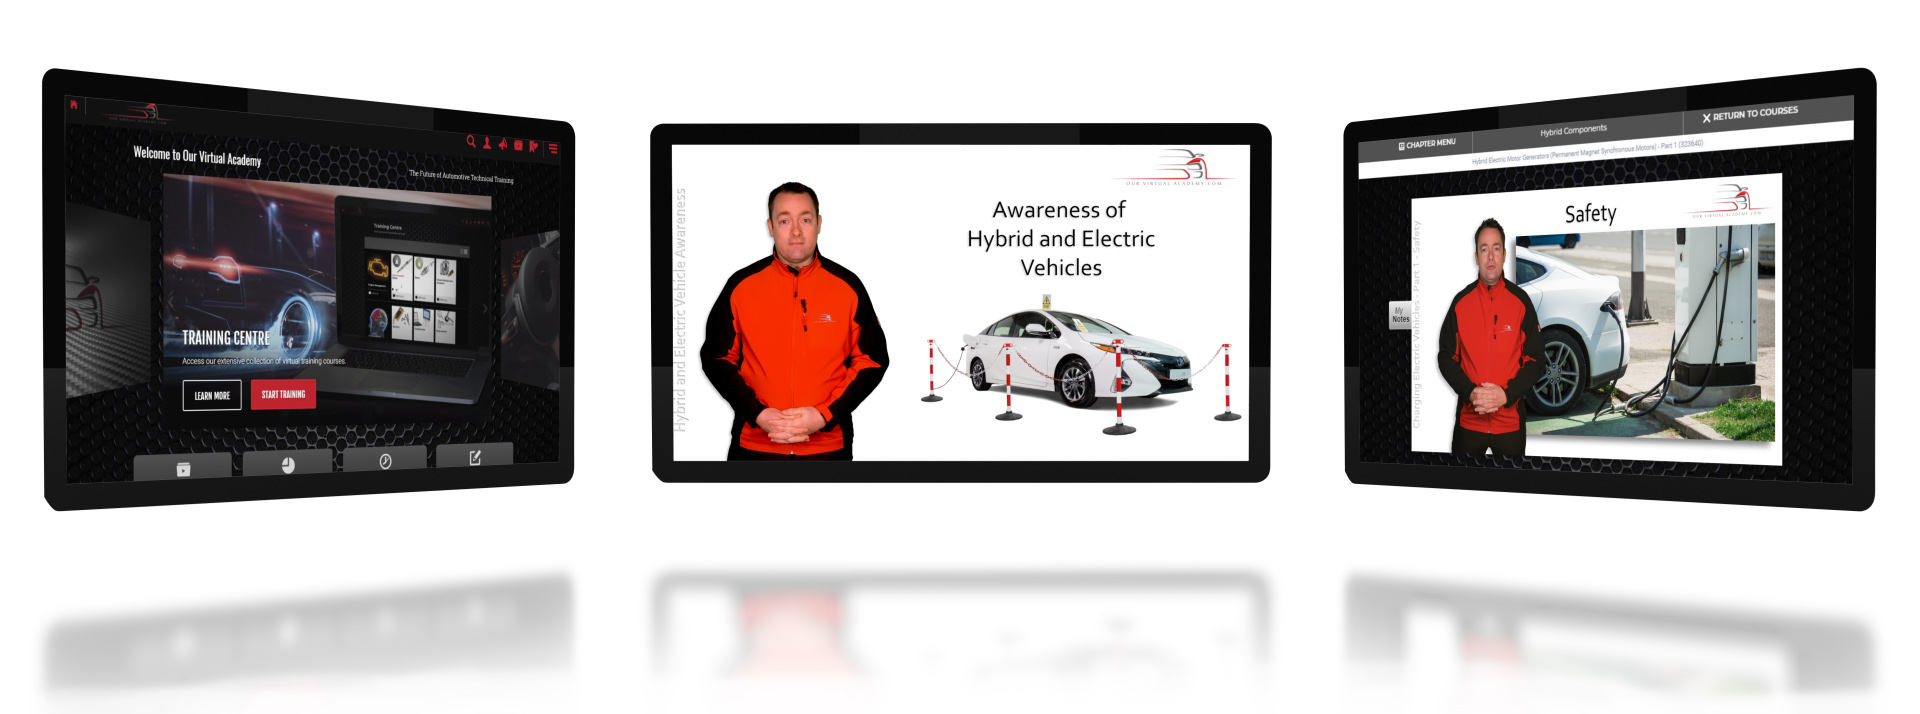 HYBRID AND ELECTRIC VEHICLE AWARENESS Autoresource